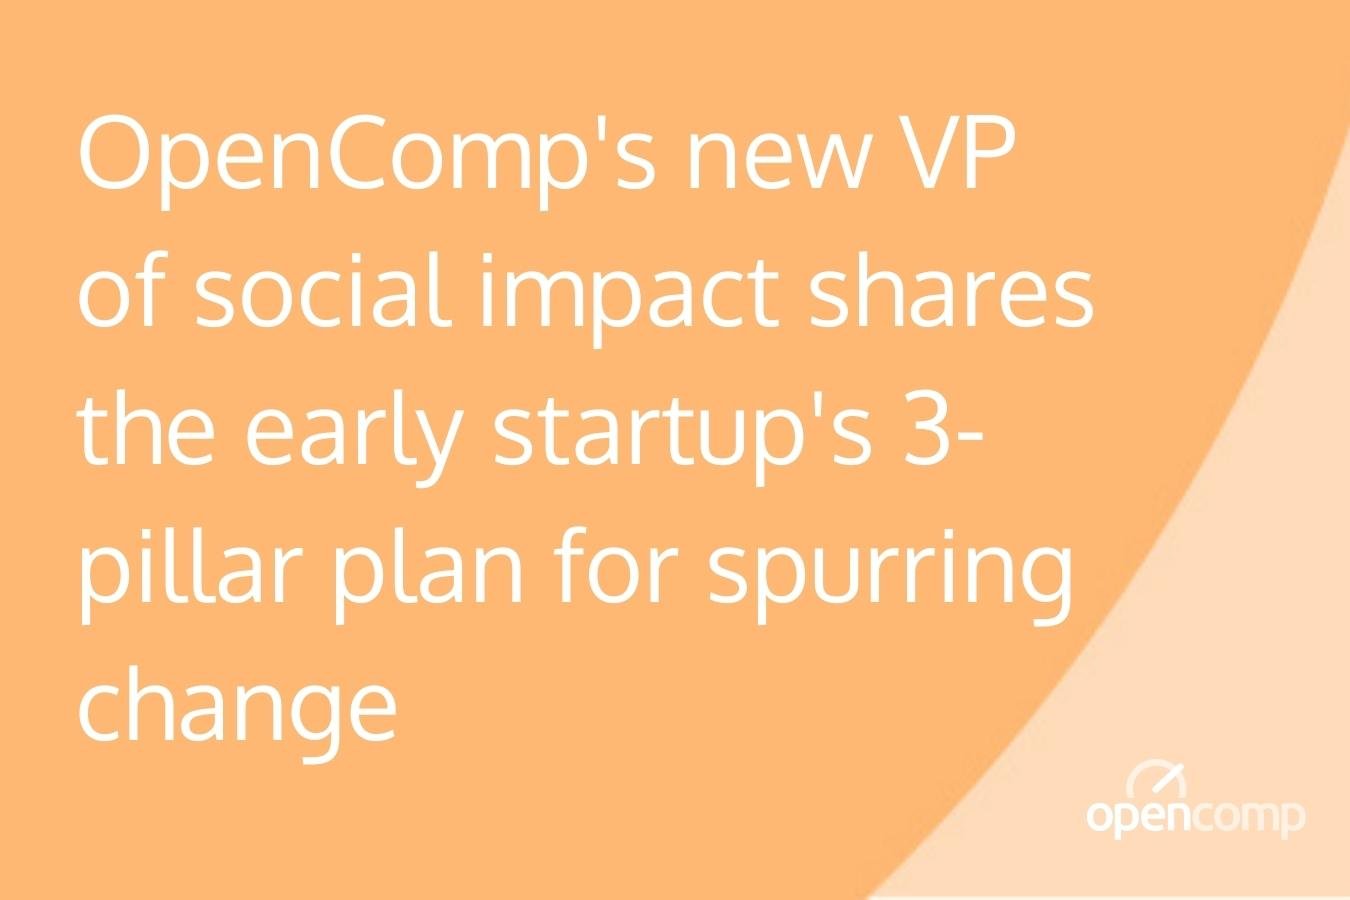 OpenComps new VP of social impact shares the early startups 3-pillar plan for spurring change